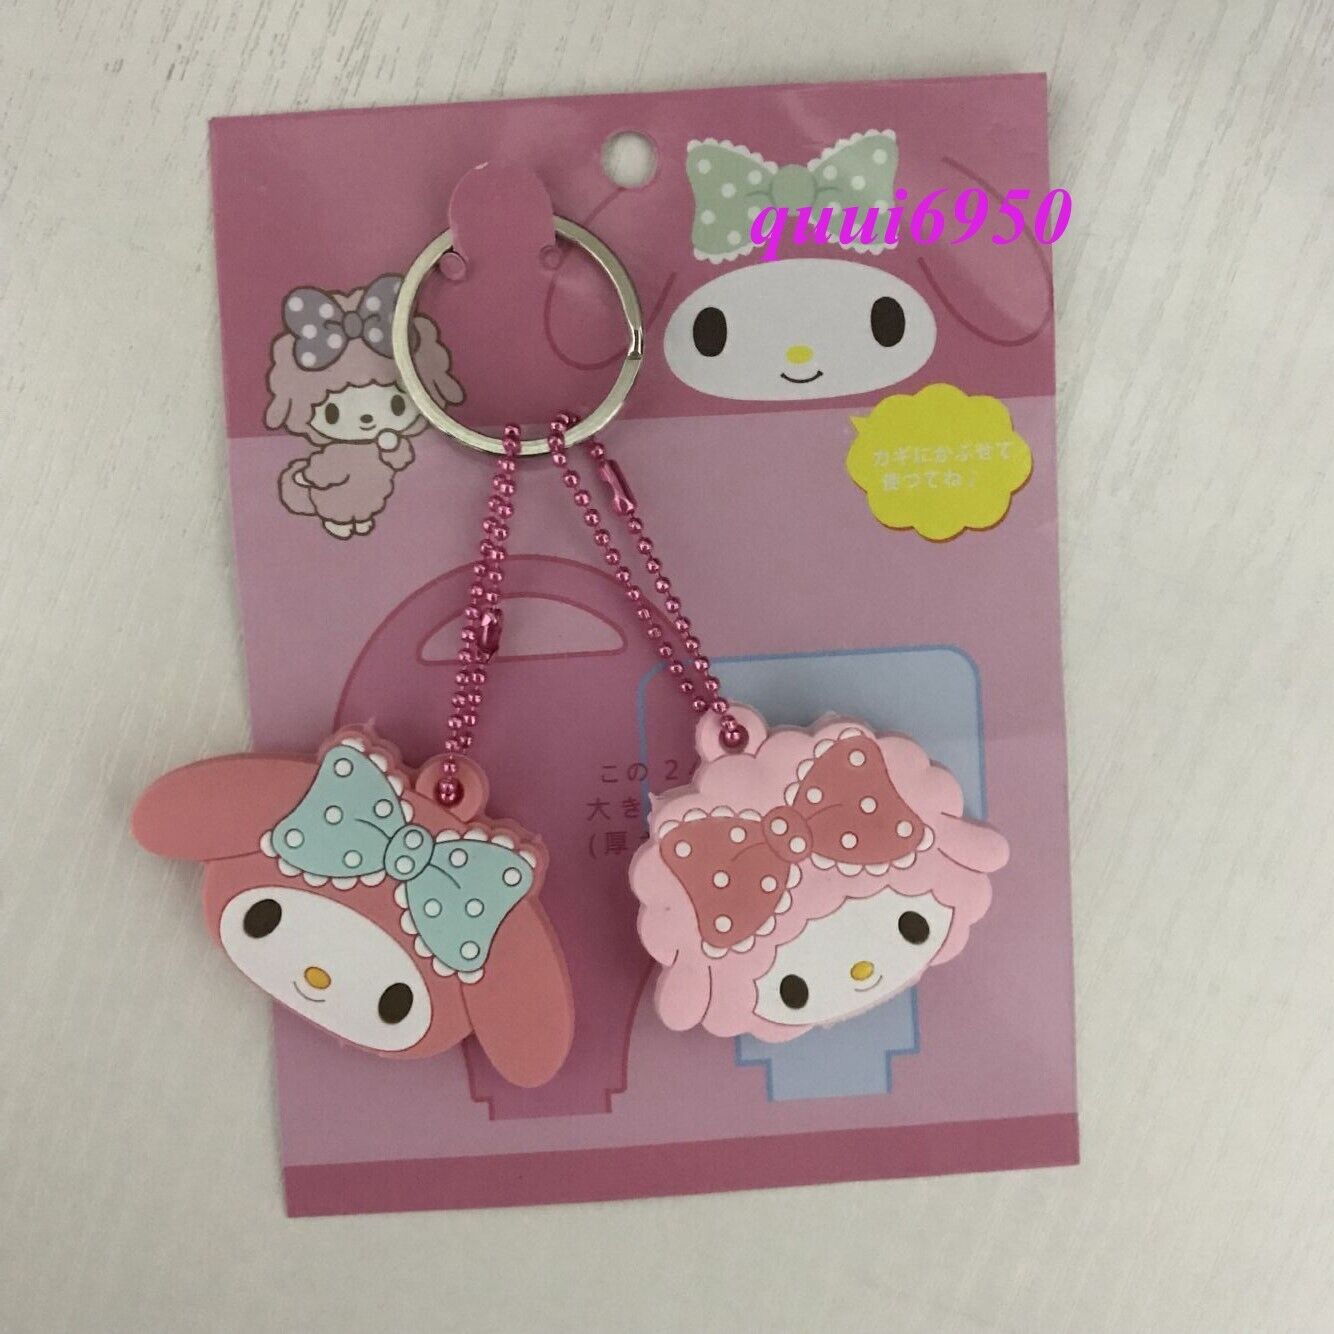 2pcs/set Cute Pink My Melody Key Cap Cover Case Keychain Keyring Girl Gift